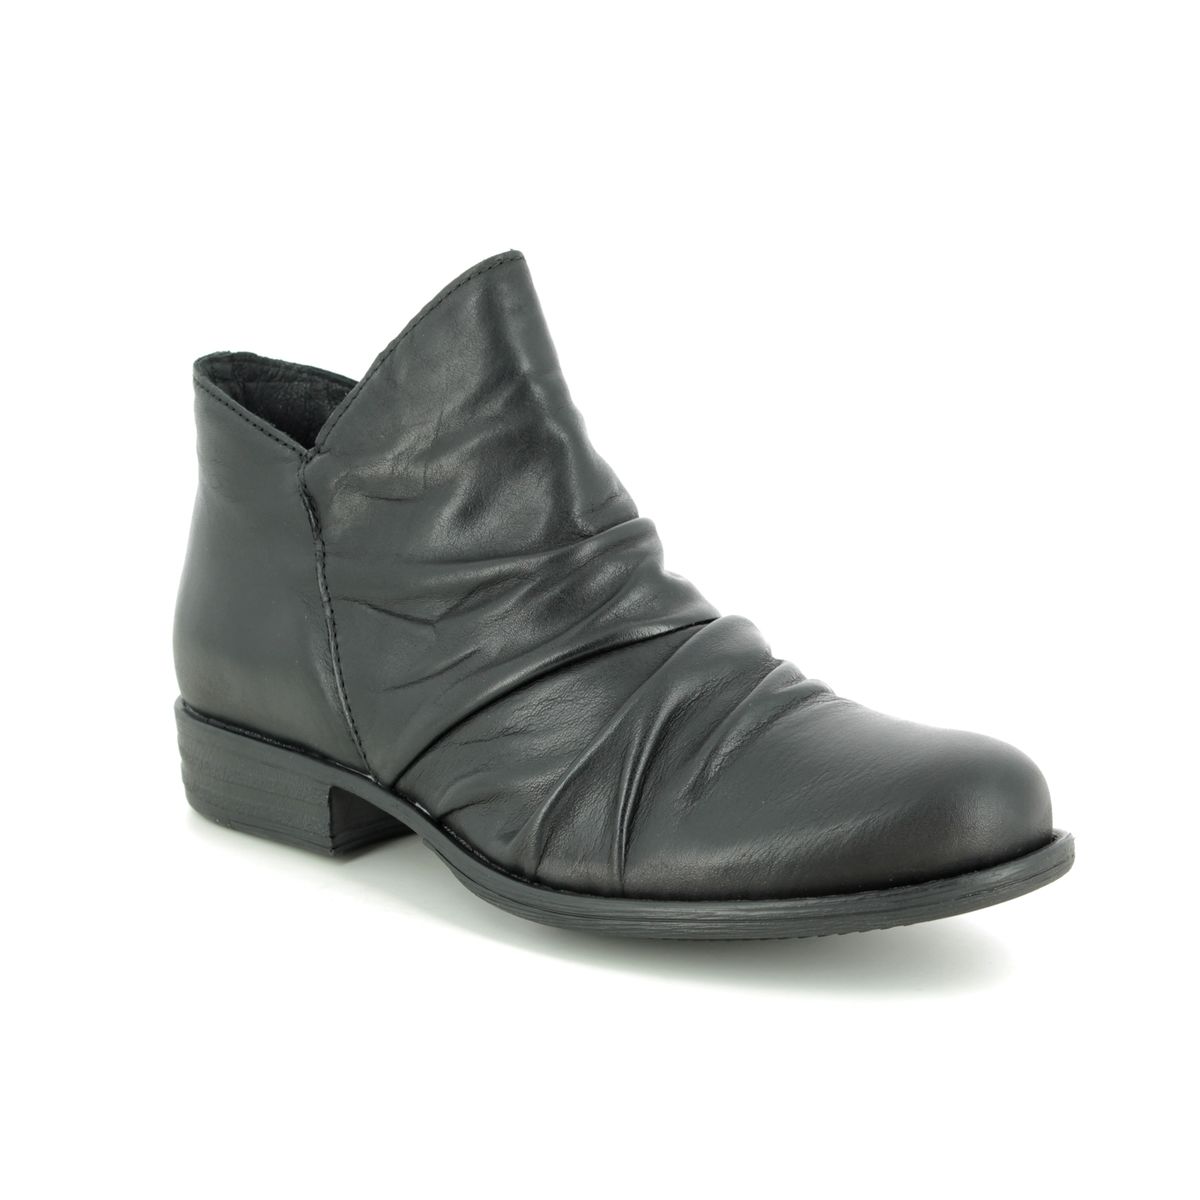 Creator Muskro Black leather Womens Ankle Boots IB18387-30 in a Plain Leather in Size 40